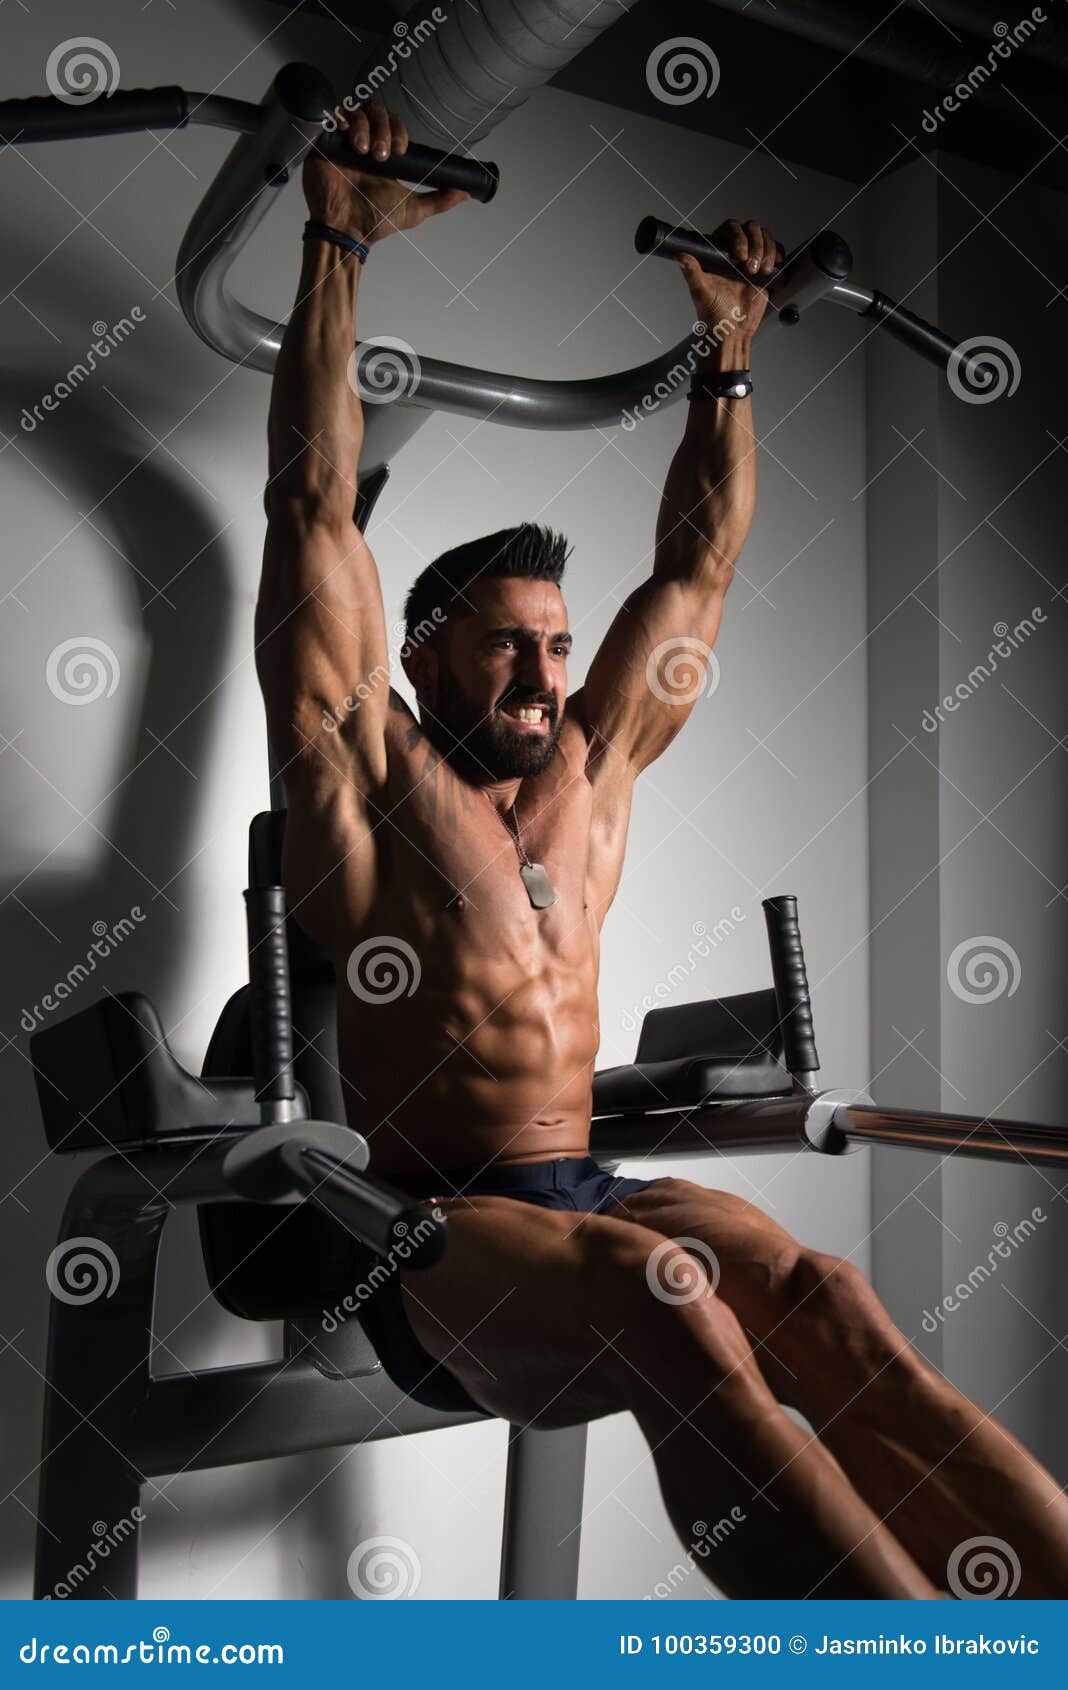 Athlete Doing Pull-up Bar Abdominal Exercise in Gym Stock Photo - Image of  bodybuilder, muscles: 100359300